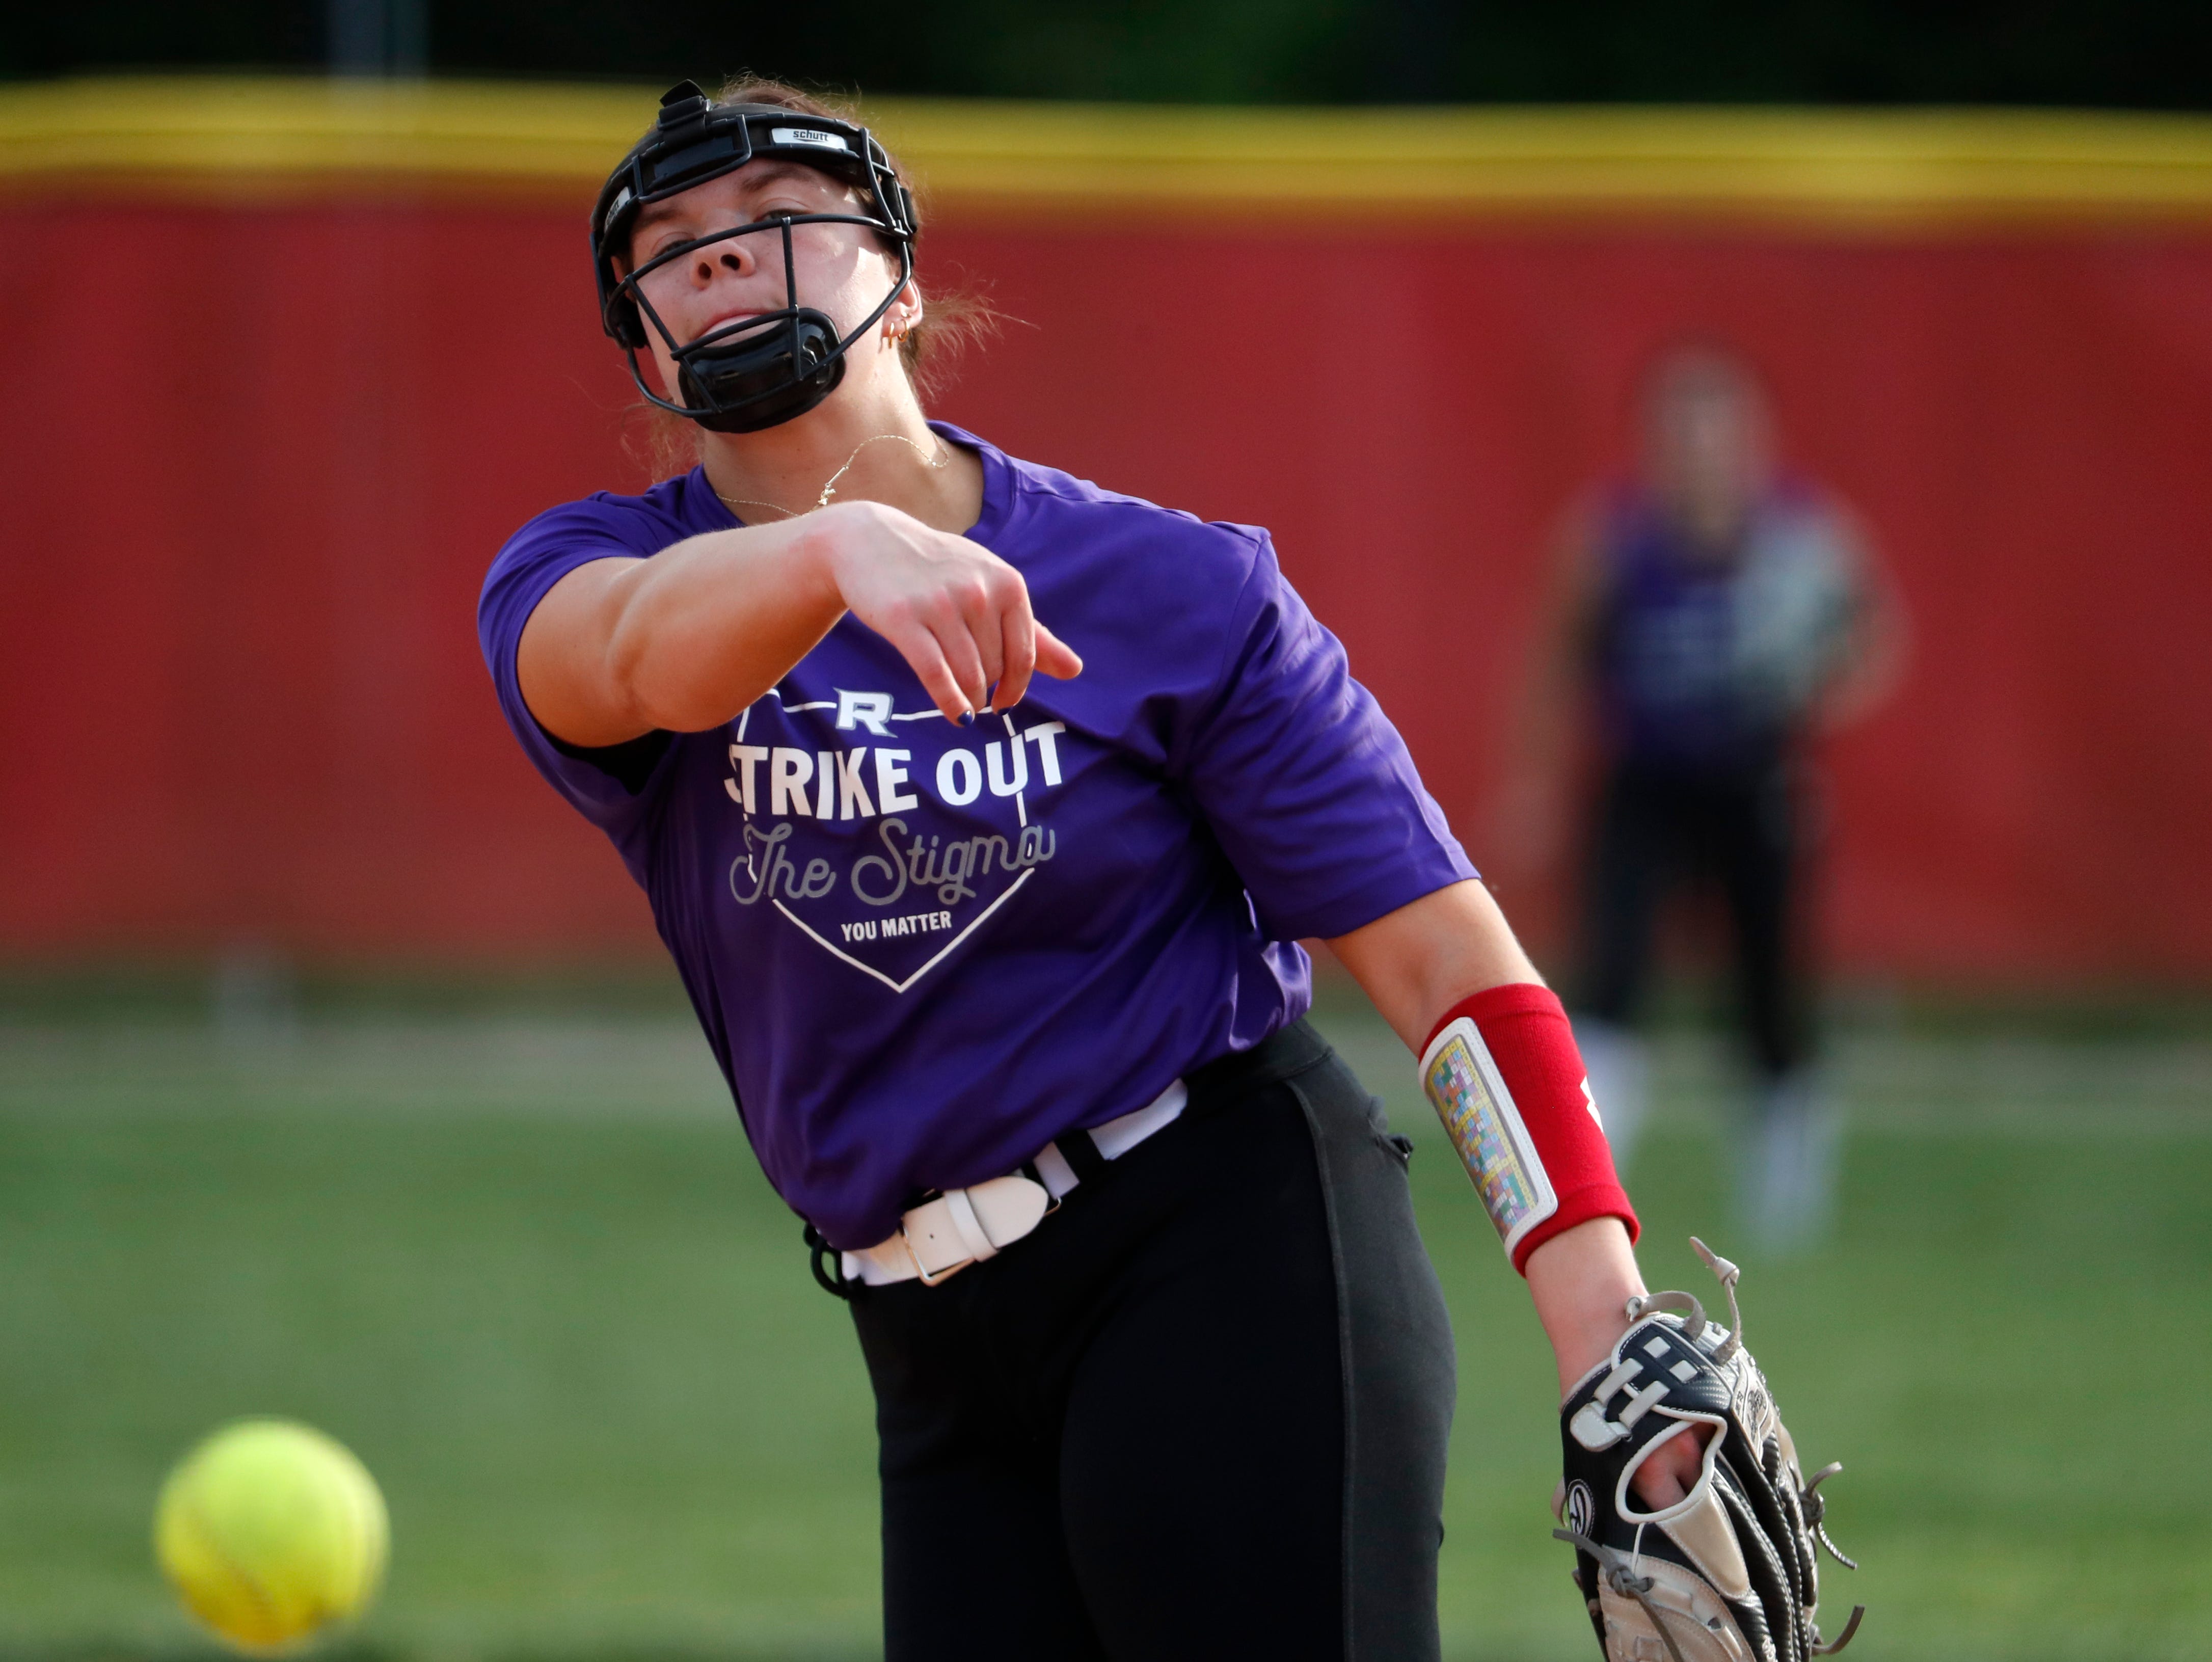 4 takeaways from Rossville and Carroll softball's pitching duel in rivalry showdown